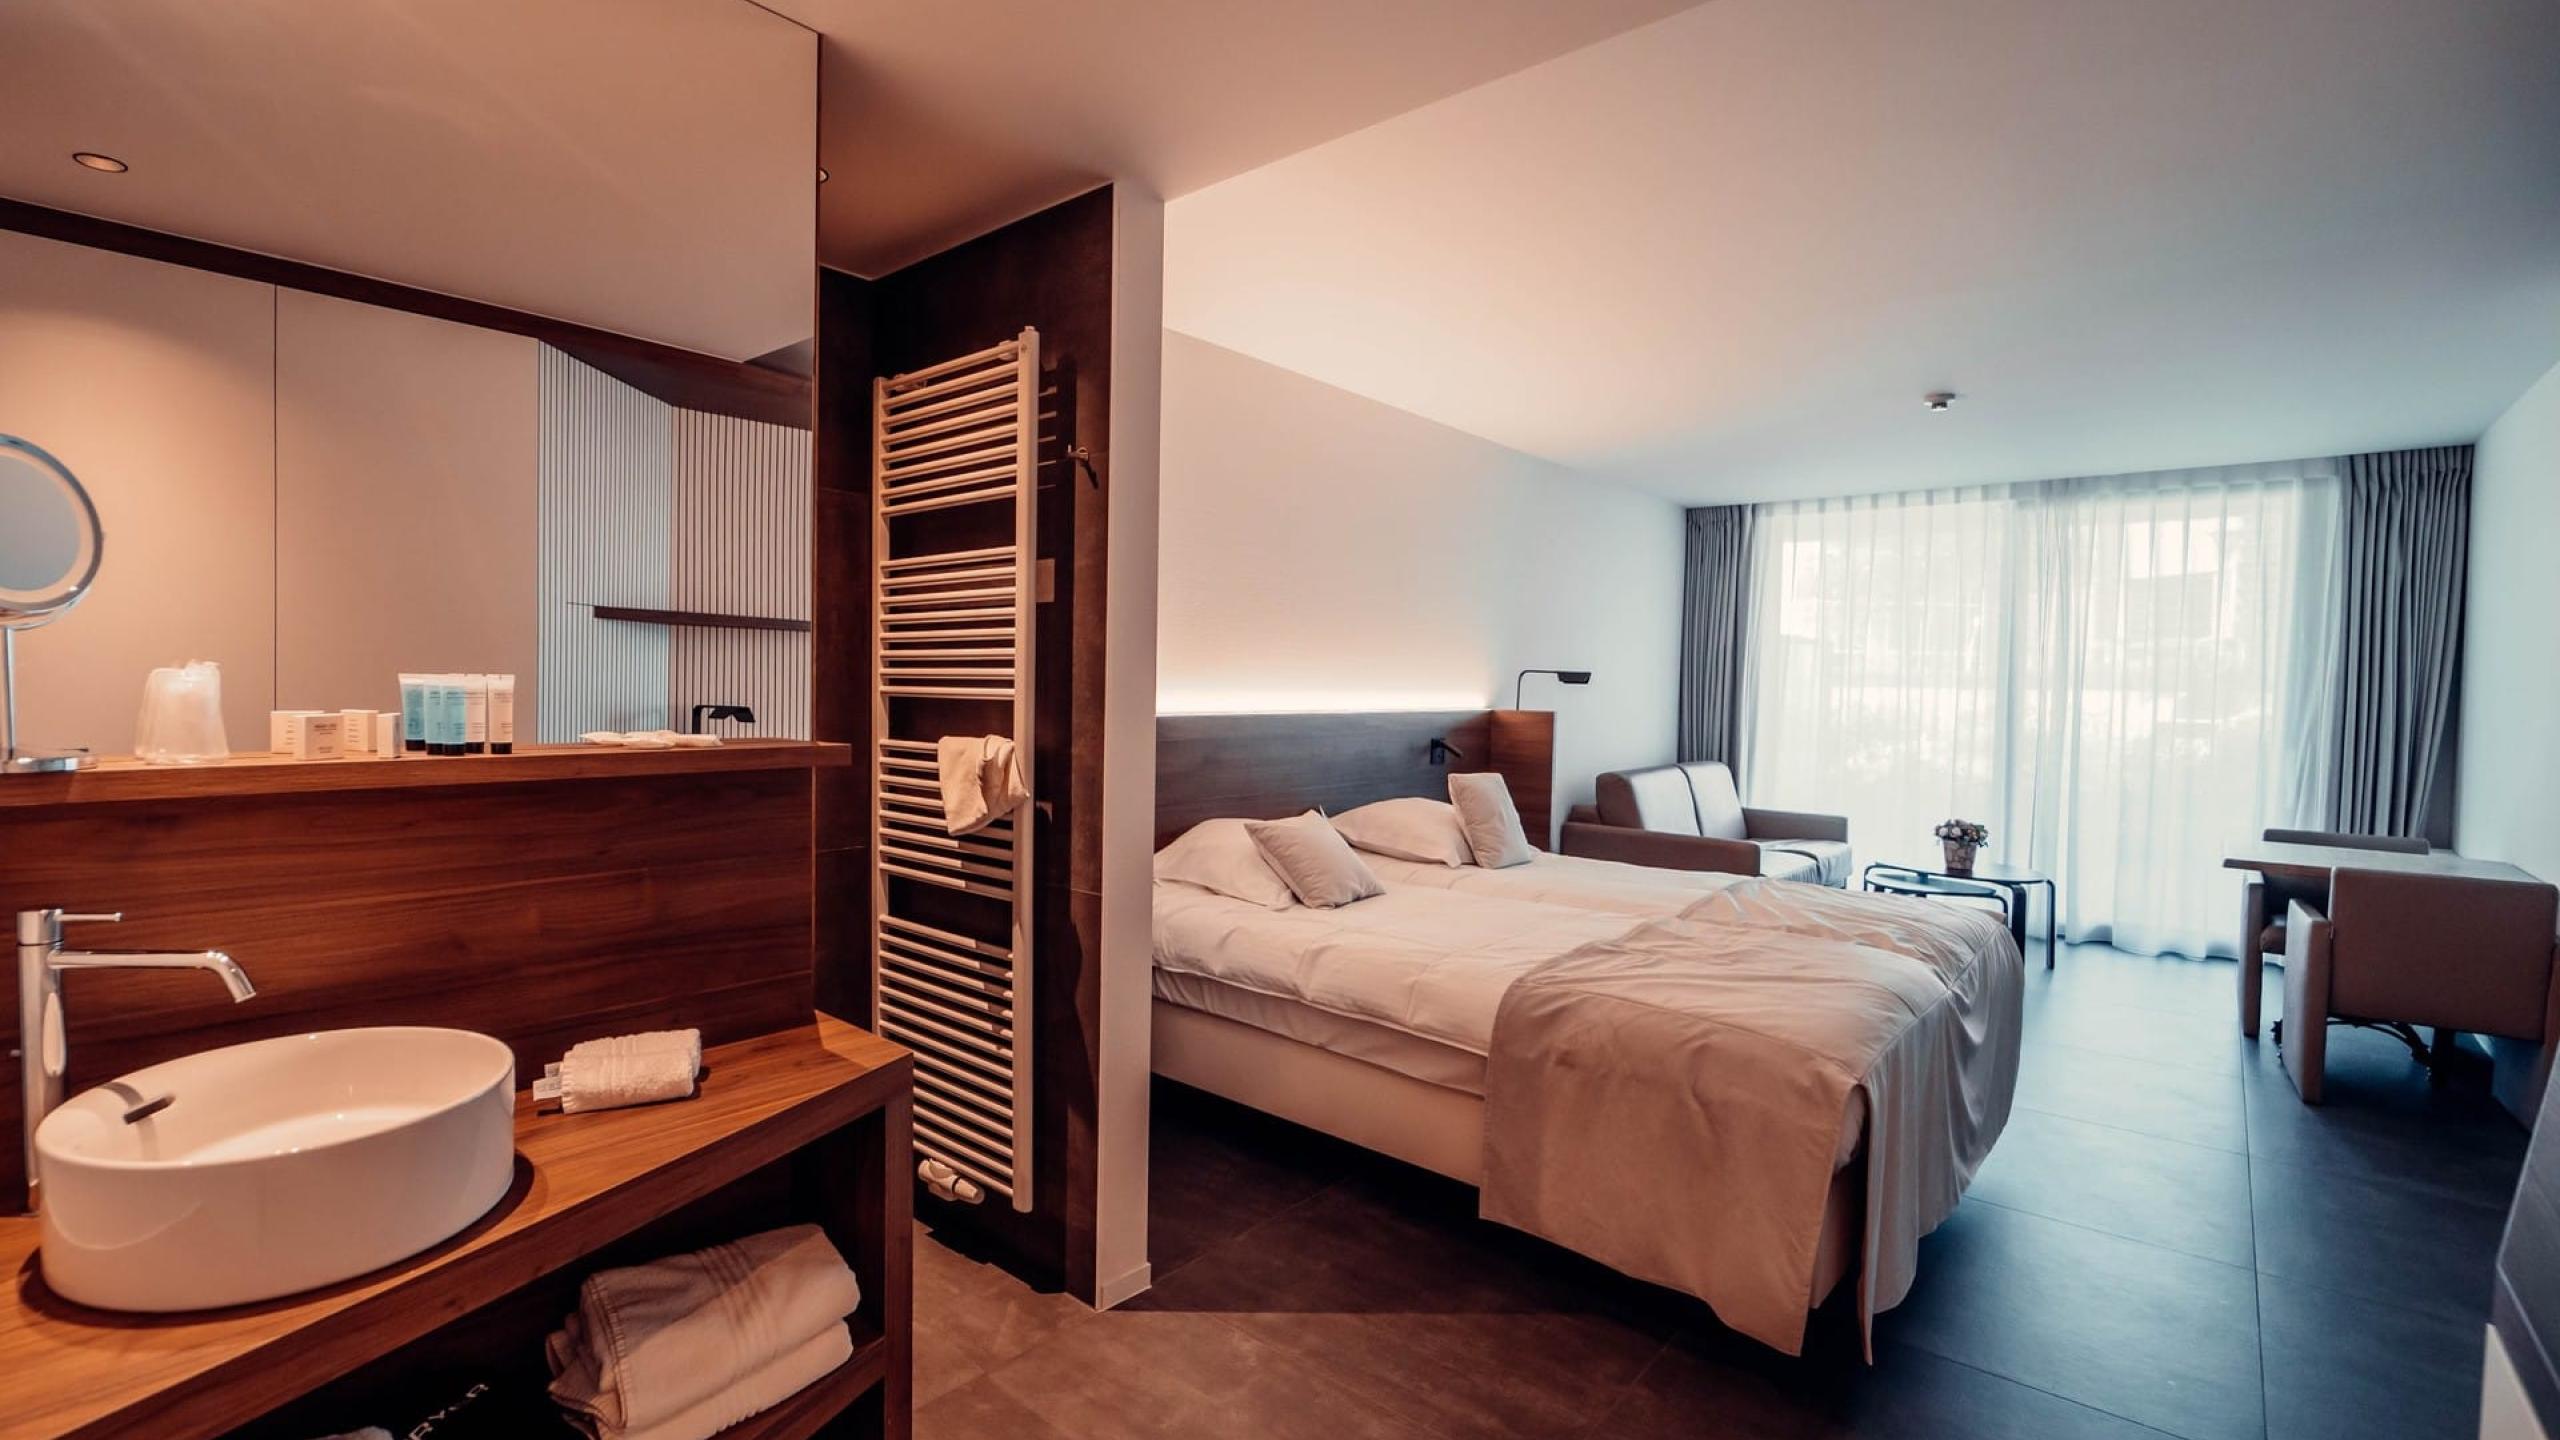 A luxurious affordable hotel in the centre of Koksijde?